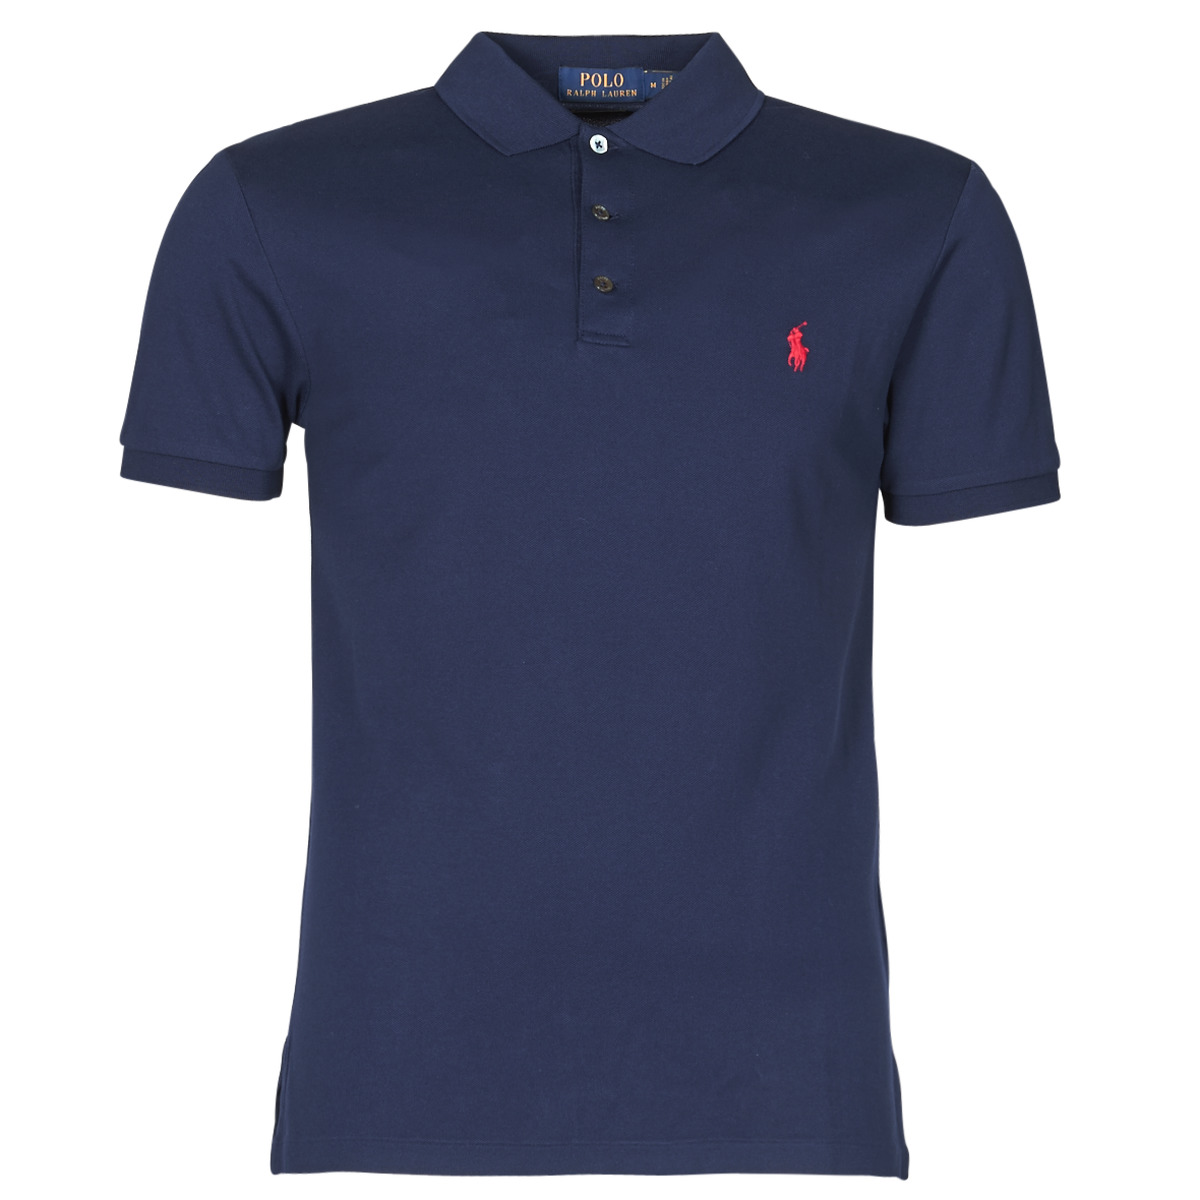 Polo Ralph Lauren POLO CINTRE SLIM FIT EN COTON STRETCH MESH LOGO PONY  PLAYER Marine - Free delivery | Spartoo NET ! - Clothing short-sleeved polo  shirts Men USD/$